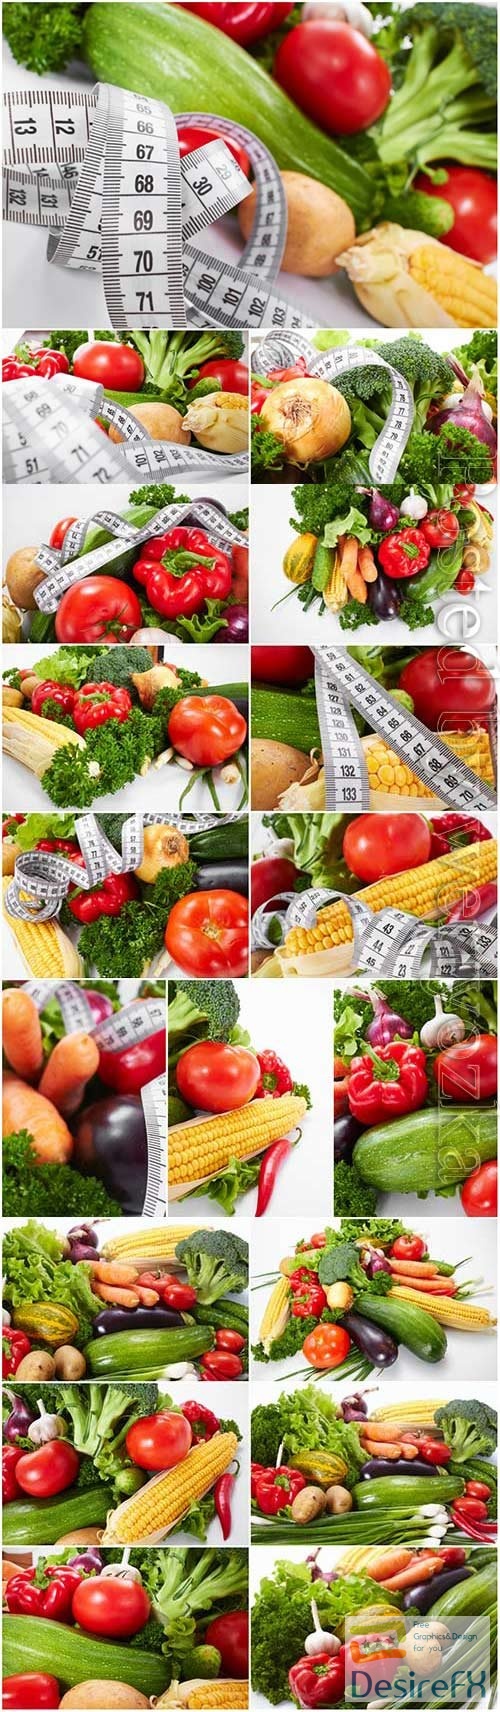 Healthy food concept, fresh vegetables stock photo